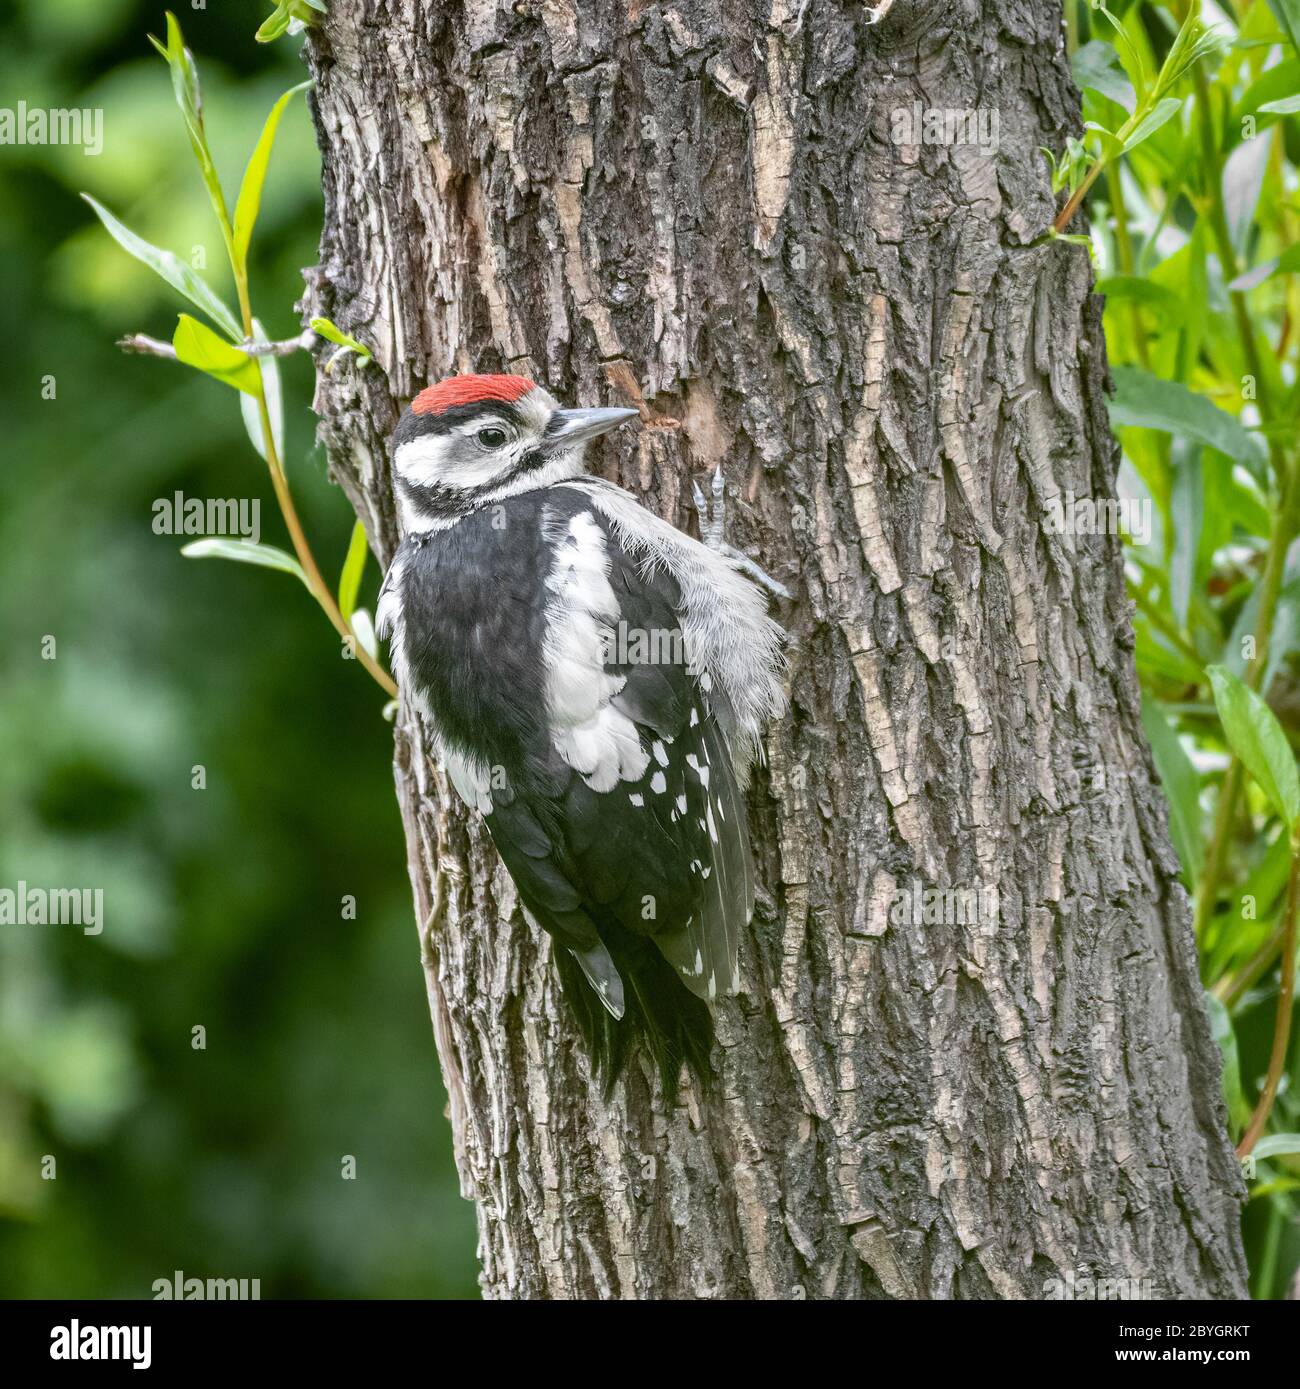 A Juvenile Great Spotted Woodpecker, Dendrocopos major,clinging to a tree trunk Stock Photo